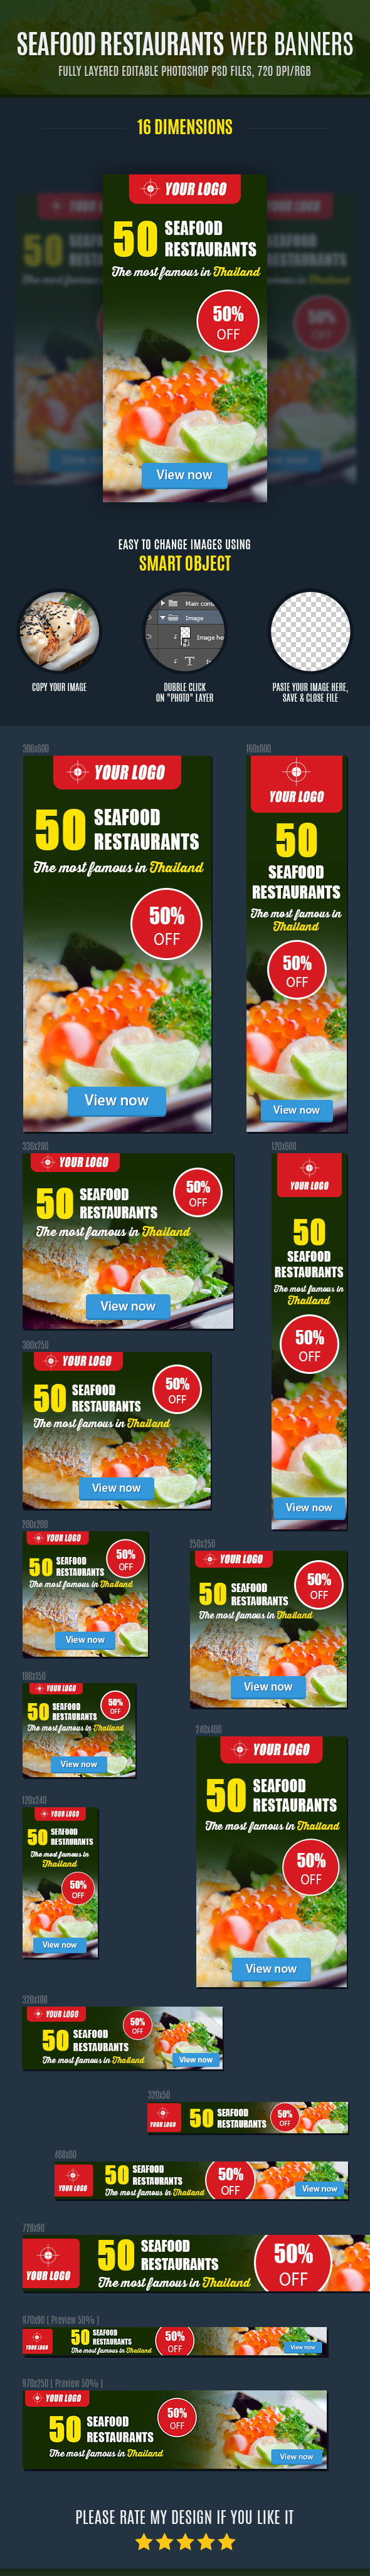 ads banner ad banners buffet business catering clean design eat editable elegant Food  fully layered